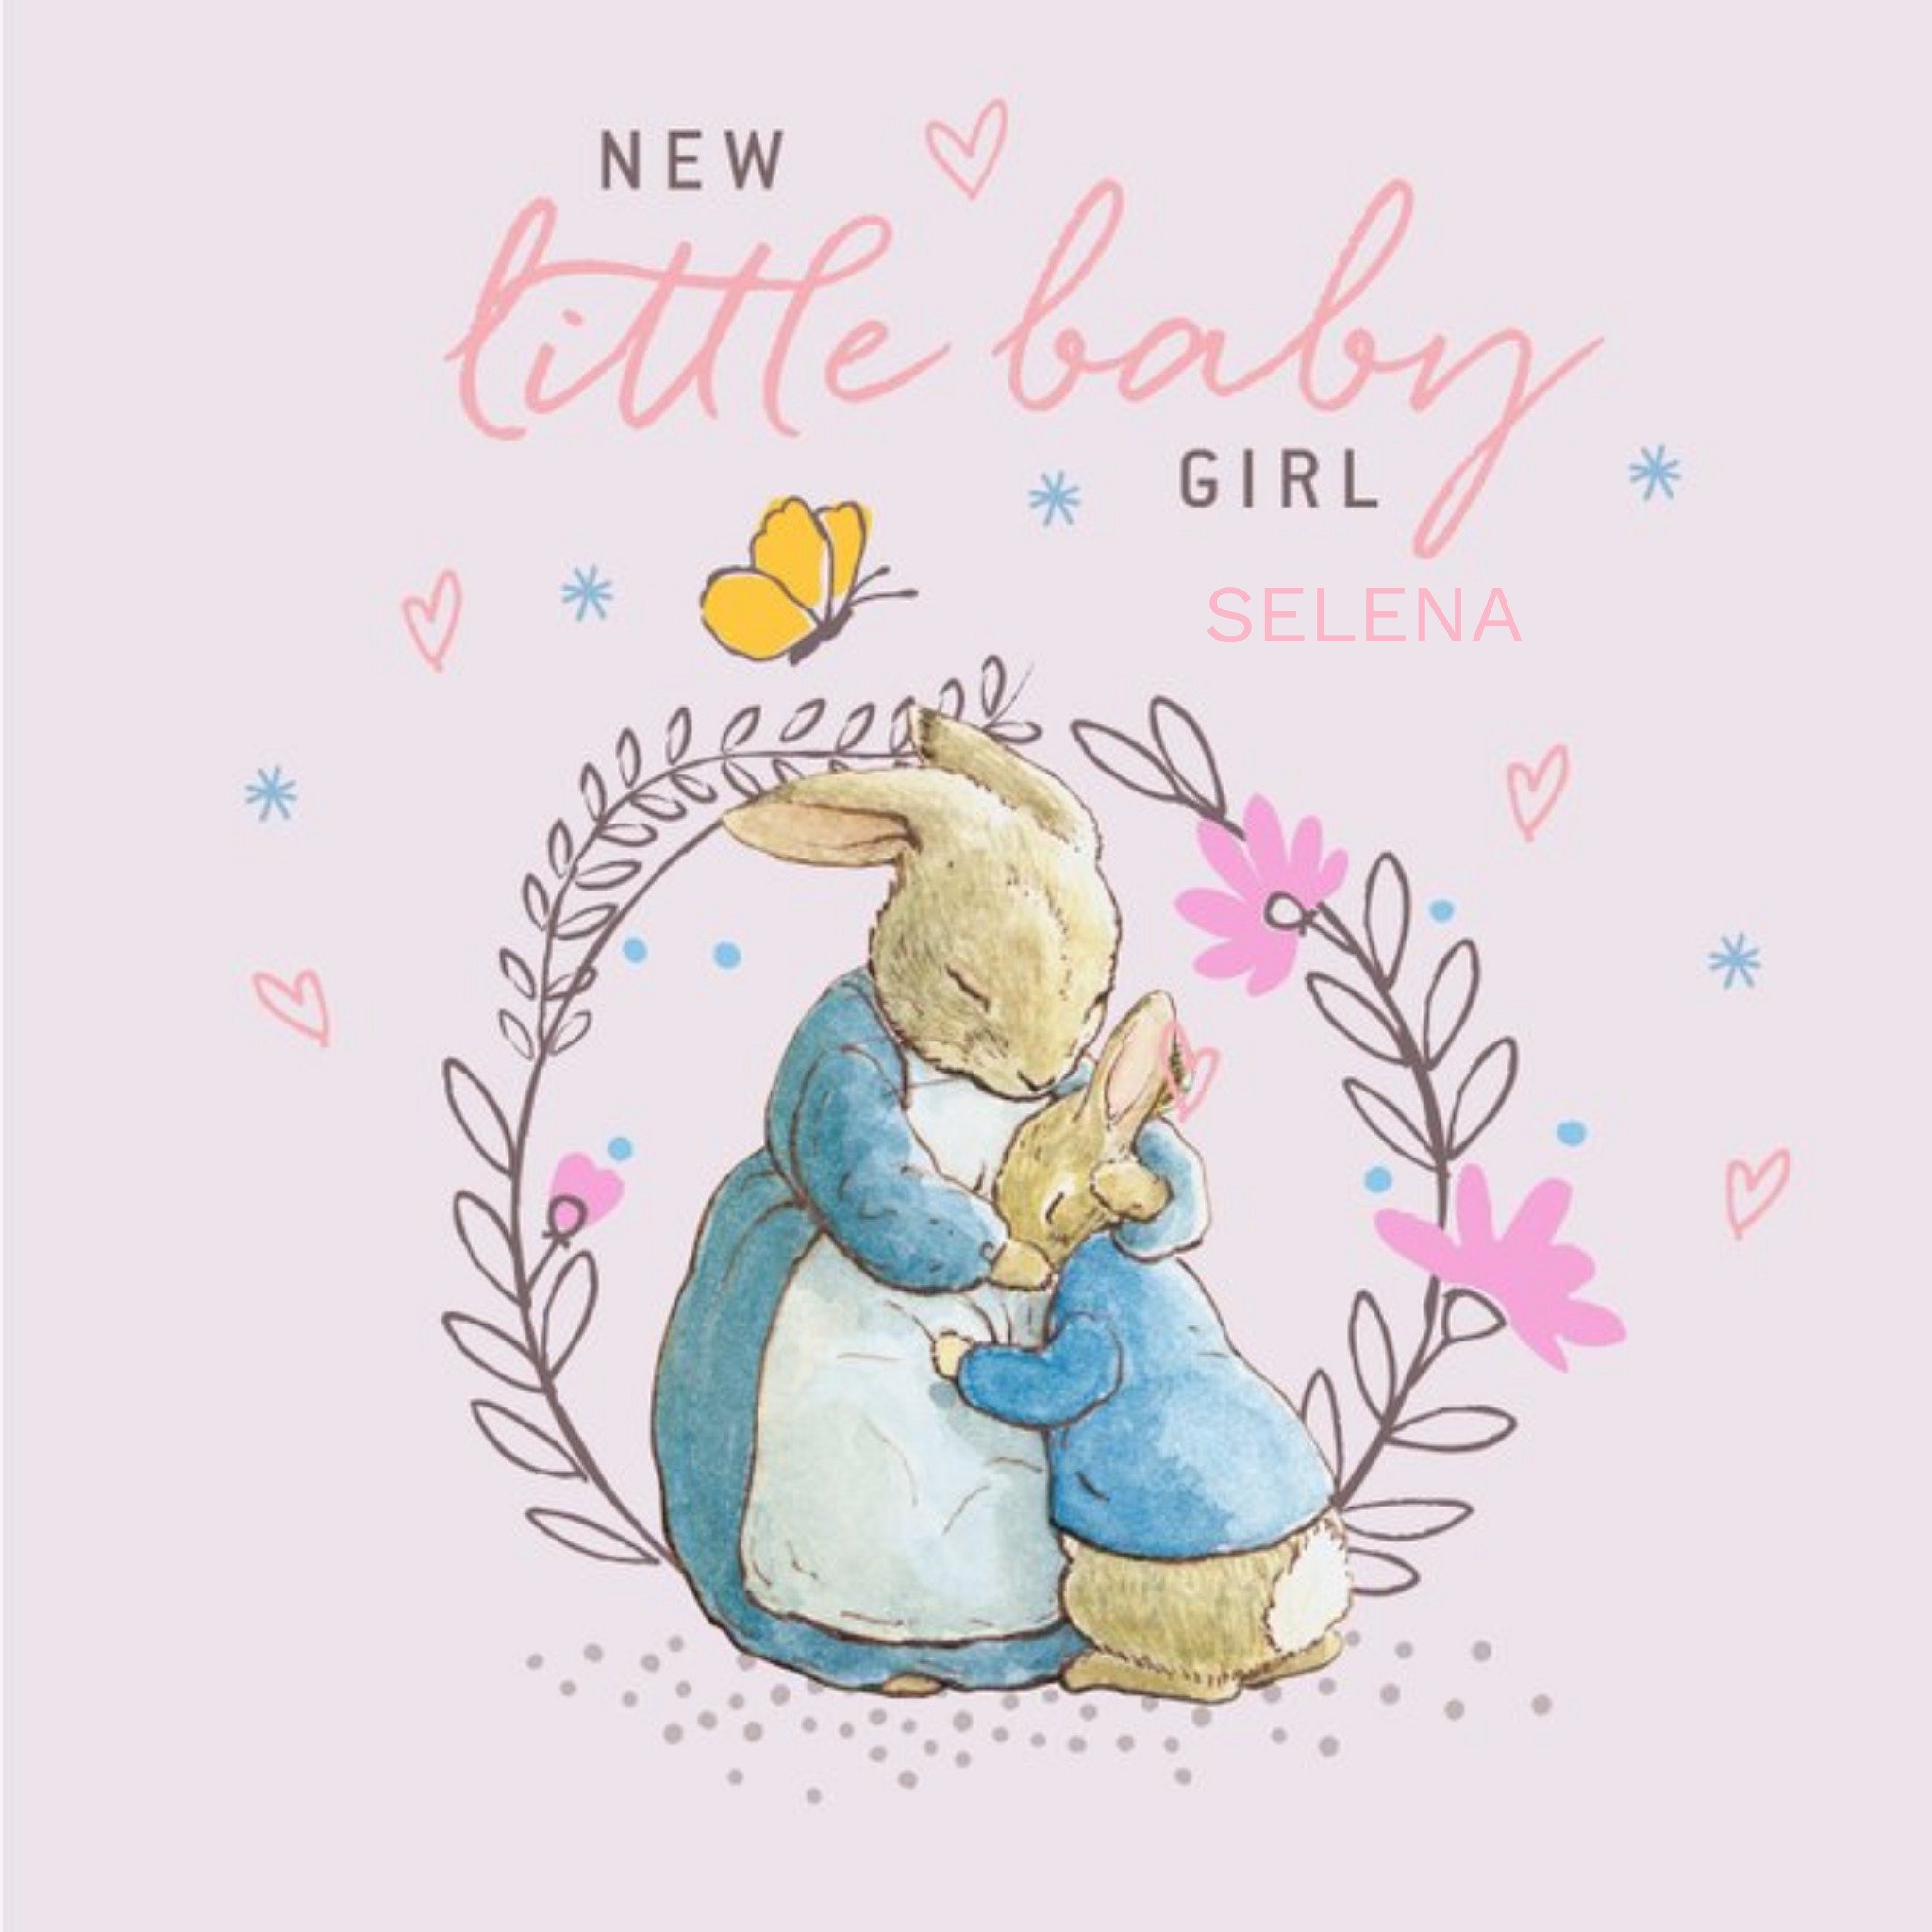 New Baby Card - Baby Girl - Peter Rabbit - Beatrix Potter, Square